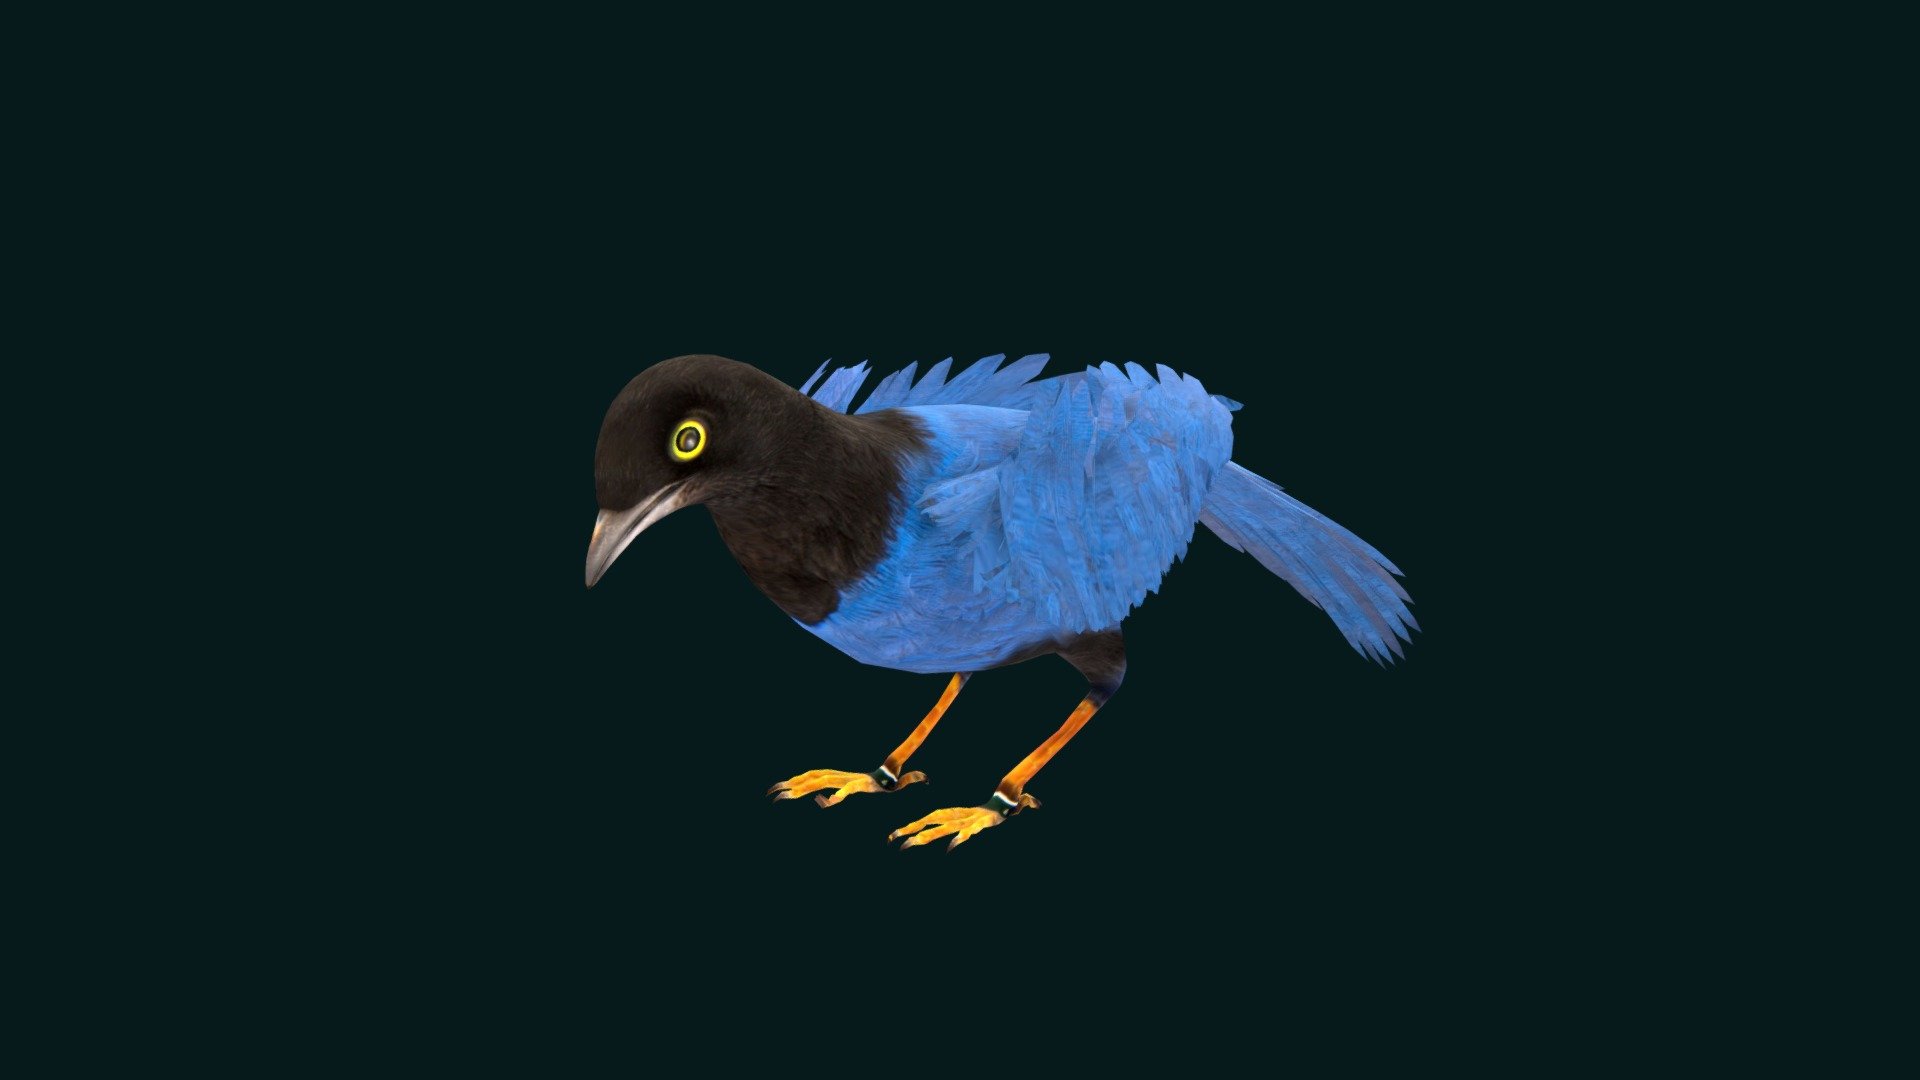 Purplish-backed jay (Cyanocorax beecheii) at the Houston_Zoo.

Crow family Corvidae Animal Bird    (purple and black bird)  

1 Draw Calls

Low Poly

Game Ready

7 Animations

4K PBR Textures Material 

Unreal FBX (Unreal 4,5 Plus)

Unity FBX  

Blend File 4.0

USDZ File (AR Ready). Real Scale Dimension

Textures Files

GLB File (Unreal 5.1  Plus Native Support)

Gltf File ( Spark AR, Lens Studio(SnapChat) , Effector(Tiktok) , Spline, Play Canvas,Omiverse ) Compatible

Triangles : 10767

Vertices  : 7800

Faces     : 5424

Edges     : 12940

Diffuse, Metallic, Roughness , Normal Map ,Specular Map,AO,
The purplish-backed jay is a bird of the crow family Corvidae, with purple feathers on its back, wings, and tail and black feathers elsewhere. It is endemic to northwestern Mexico, where its habitat is mainly dry deciduous forest. Wikipedia
Scientific name: Cyanocorax_beecheii
Conservation status: Least Concern (Population decreasing) Encyclopedia of Life
Higher classification: Cyanocorax Jays - Purplish-backed Jay Bird - Buy Royalty Free 3D model by Nyilonelycompany 3d model